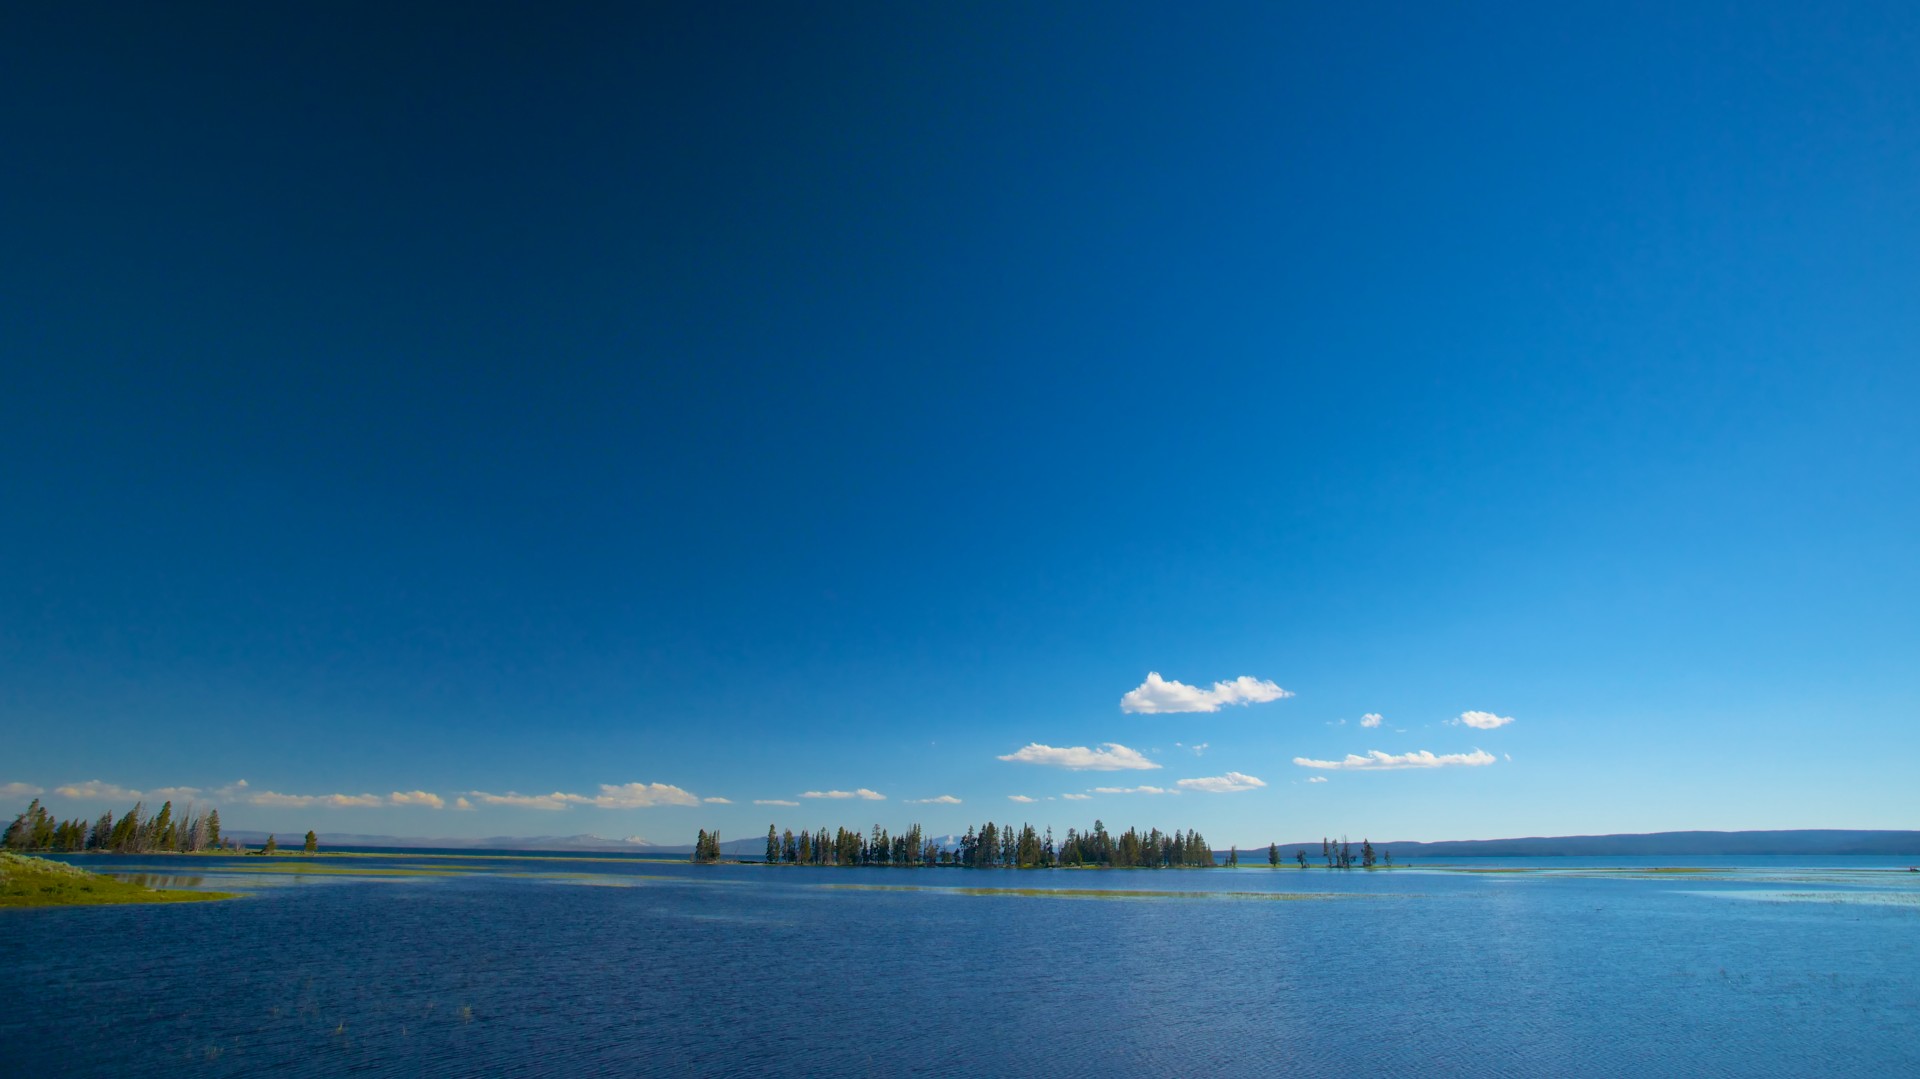 Narrow island covered in pine trees sits in a blue lake in Yellowstone National Park.